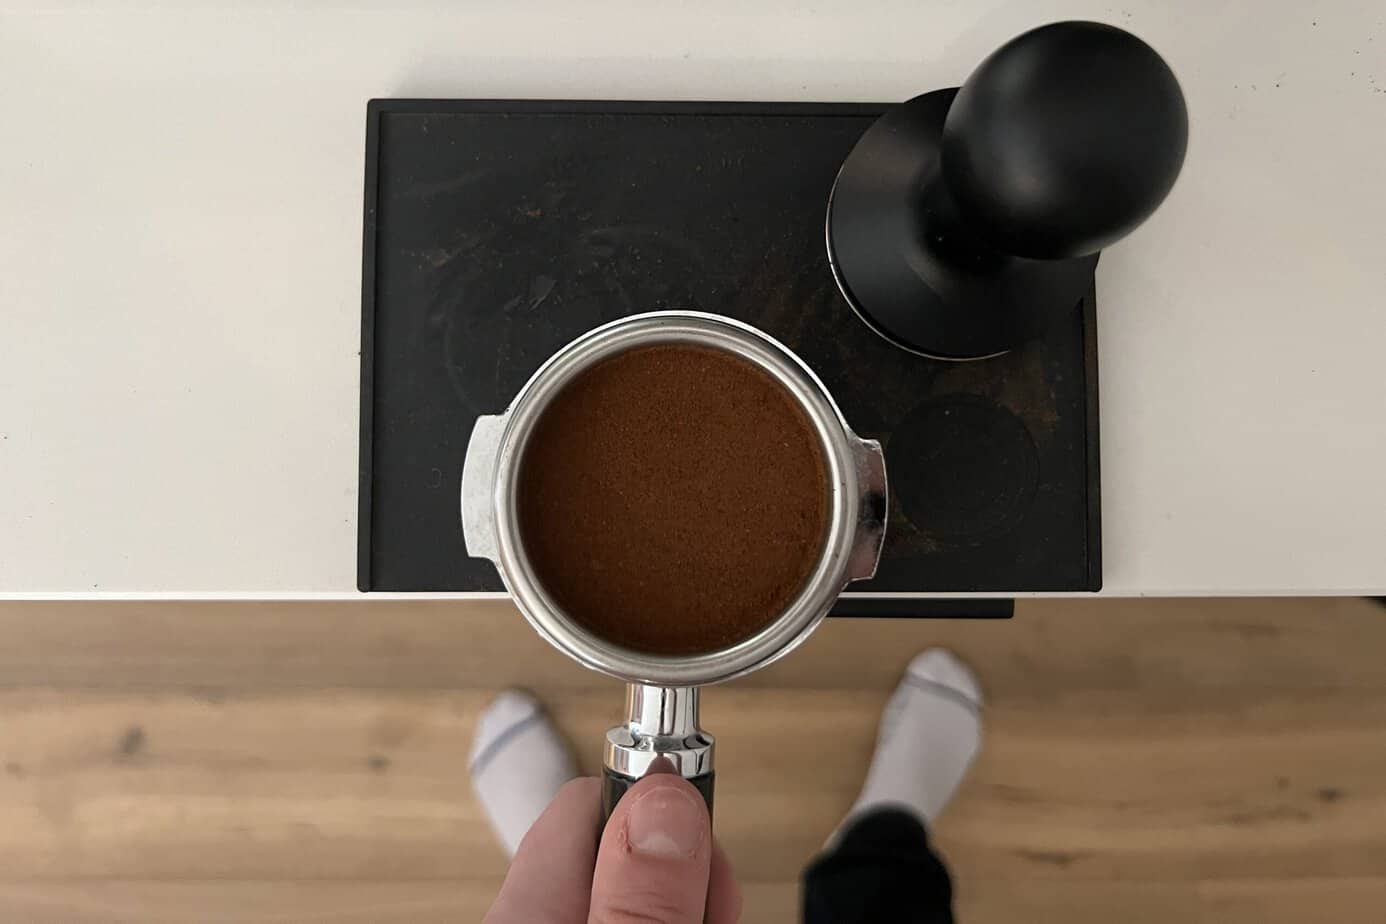 Tamping pressure to form coffee puck